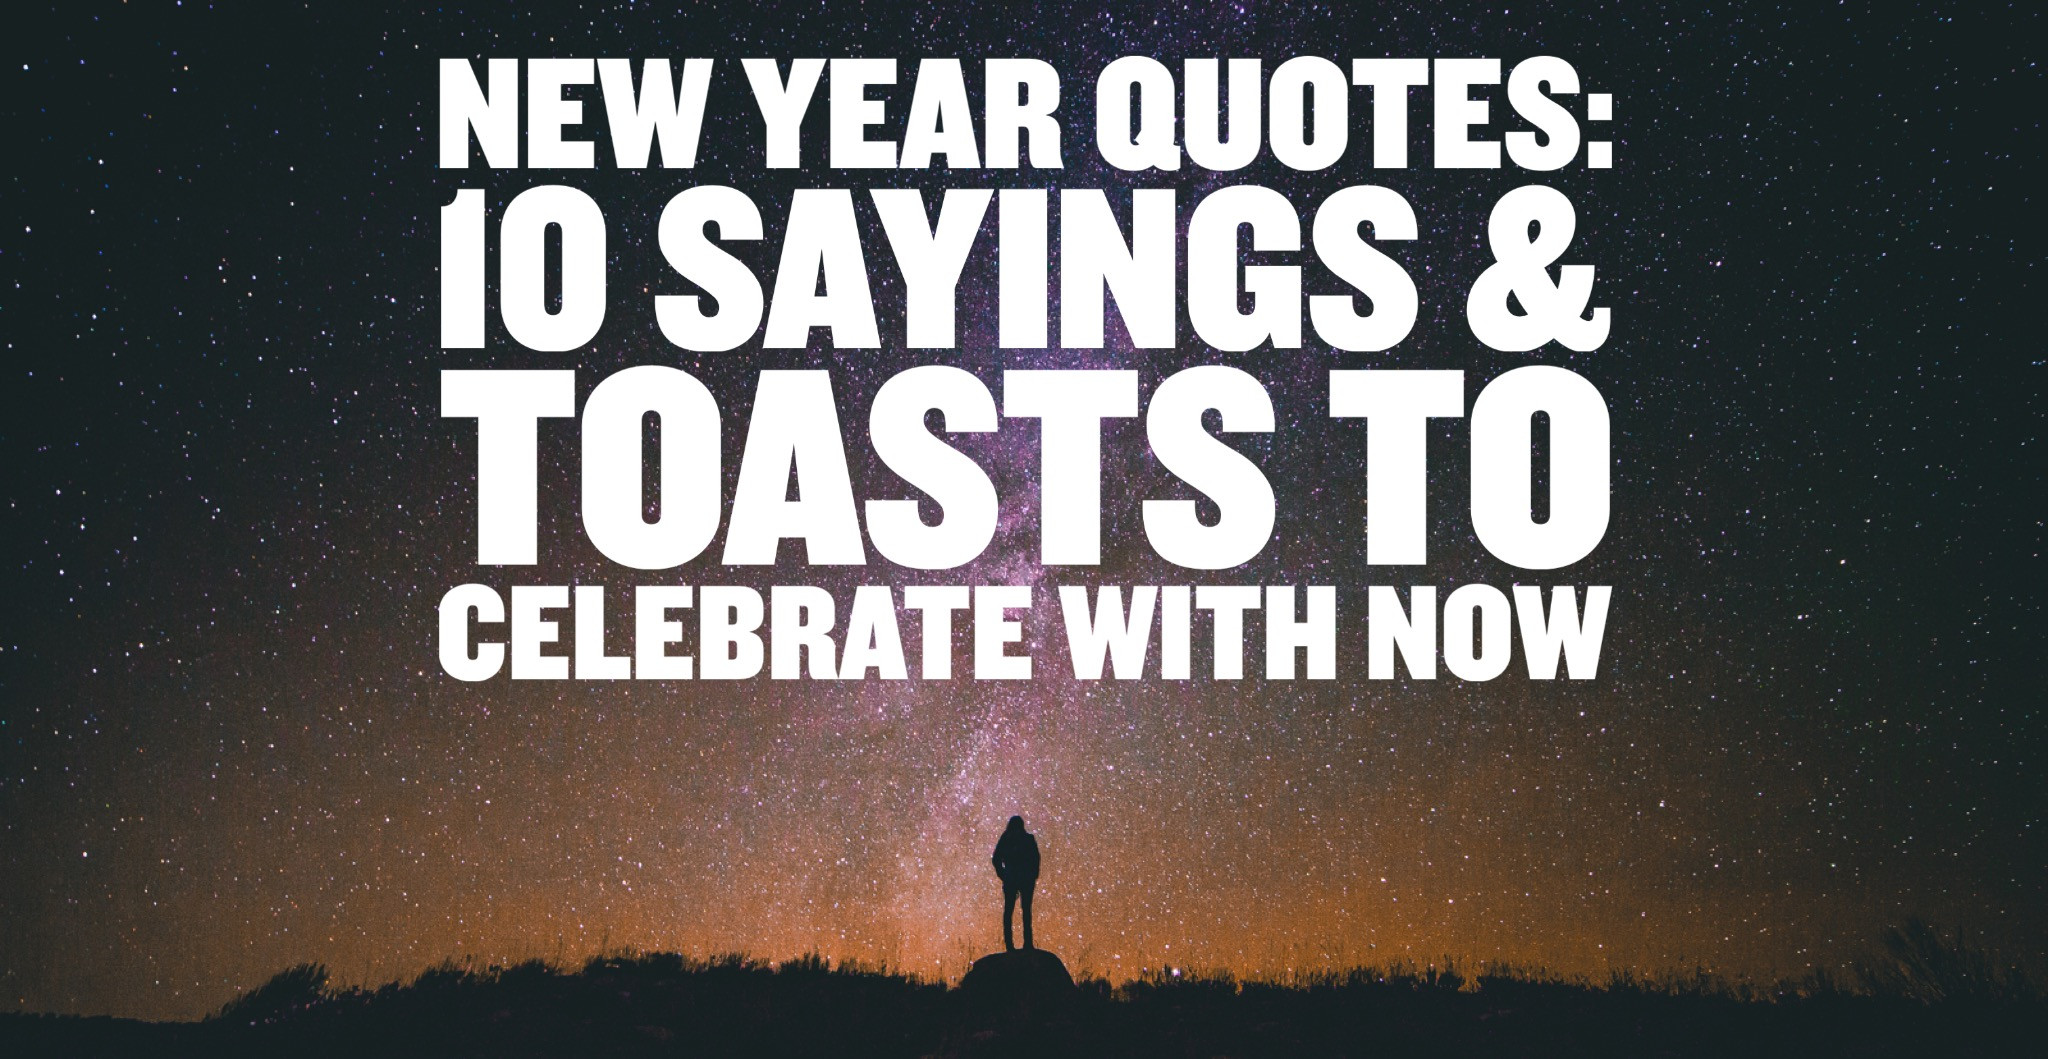 New Year Quotes Images
 New Year Quotes 10 Sayings & Toasts To Celebrate With